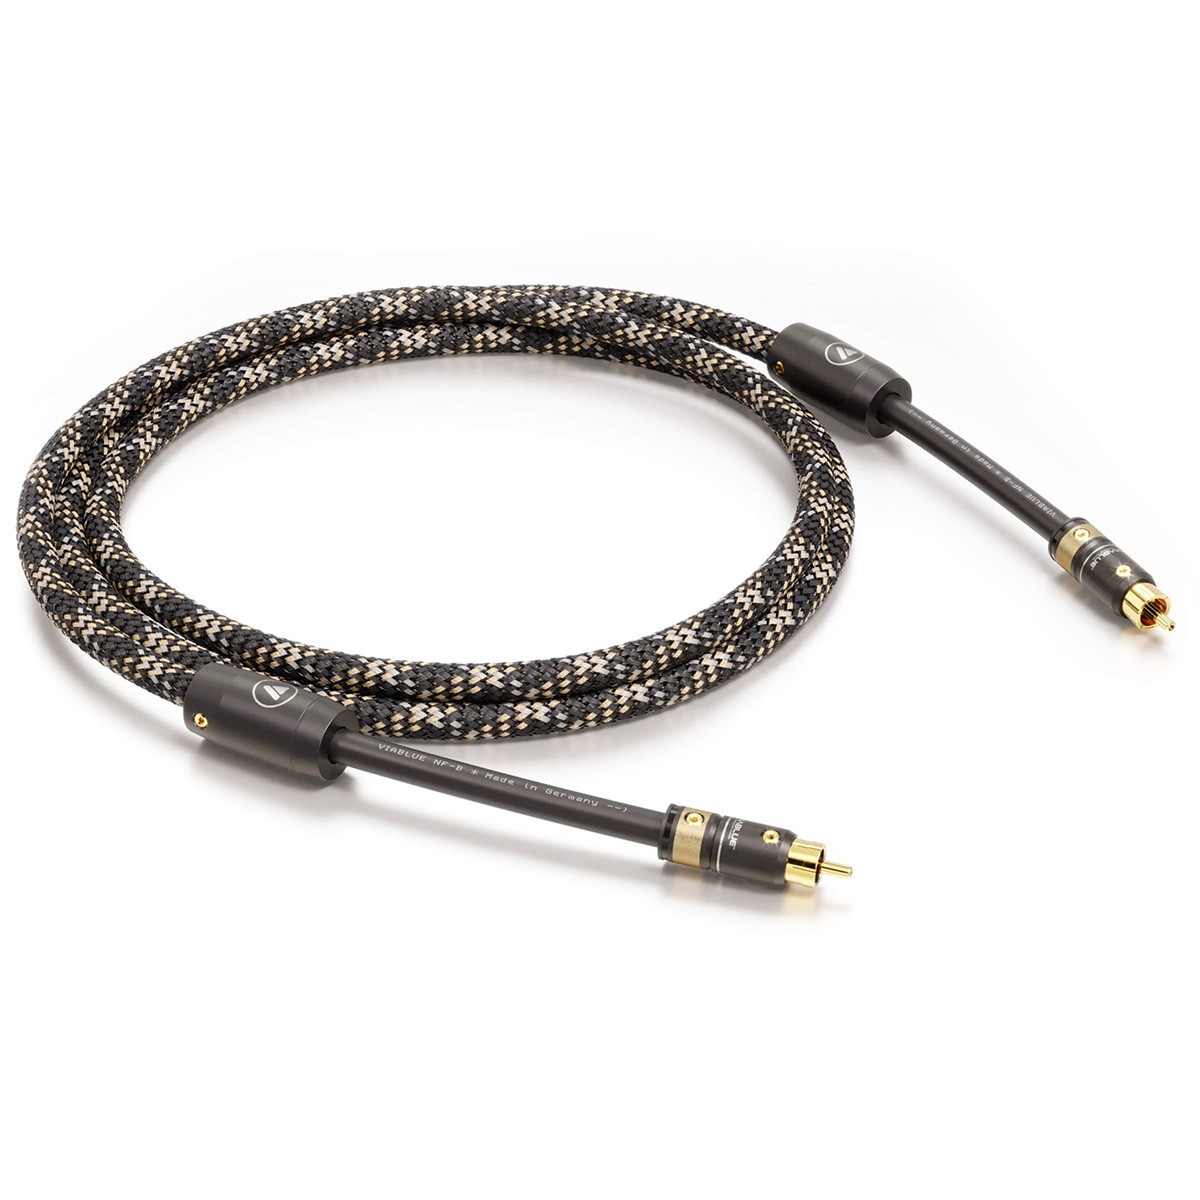 VIABLUE NF-B Subwoofer LFE RCA Interconnect Cable 2.5m